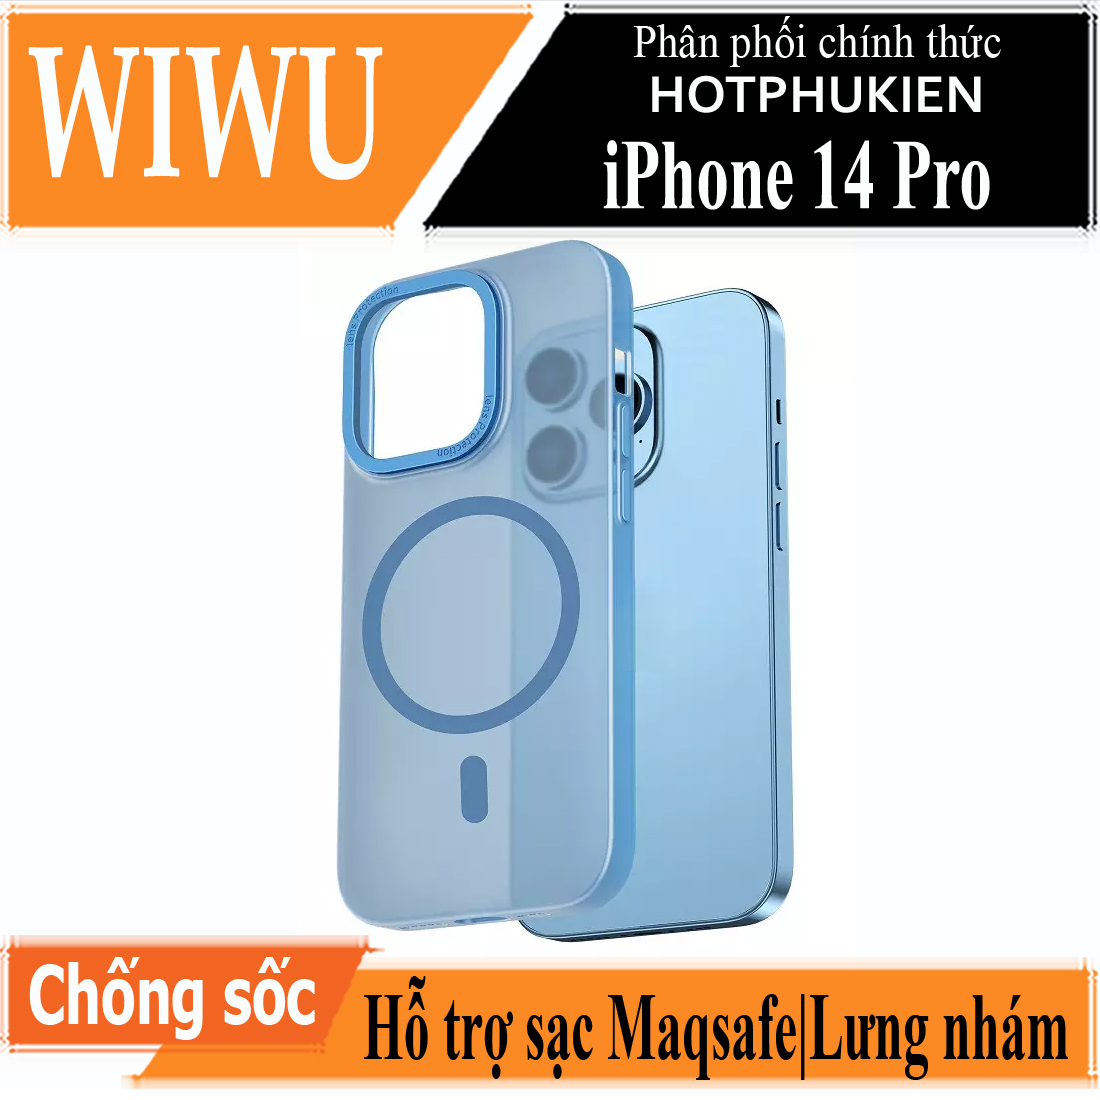 Ốp lưng chống sốc cho iPhone 14 Pro (6.1 inch) hỗ trợ sạc Magsafe hiệu WIWU PC Ultra-thin Frosted Magnetic Case